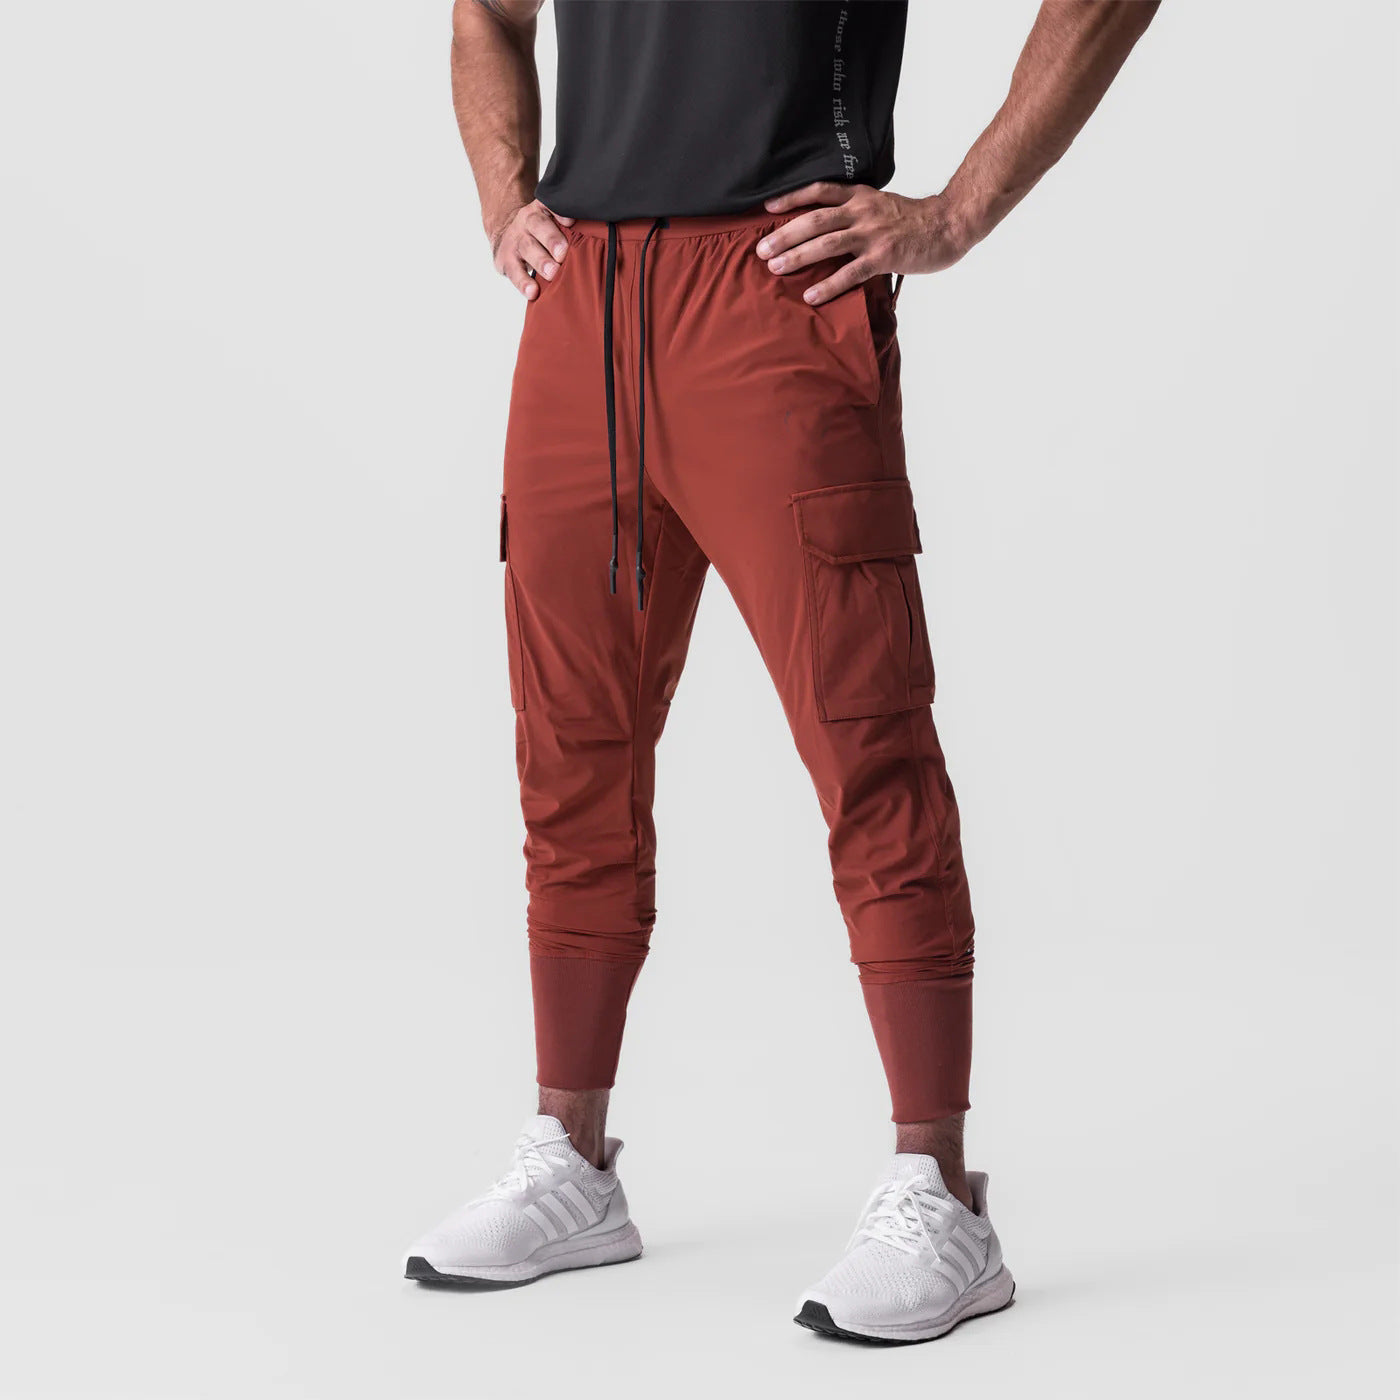 Muscle Men's Exercise Casual Pants Fitness Thin